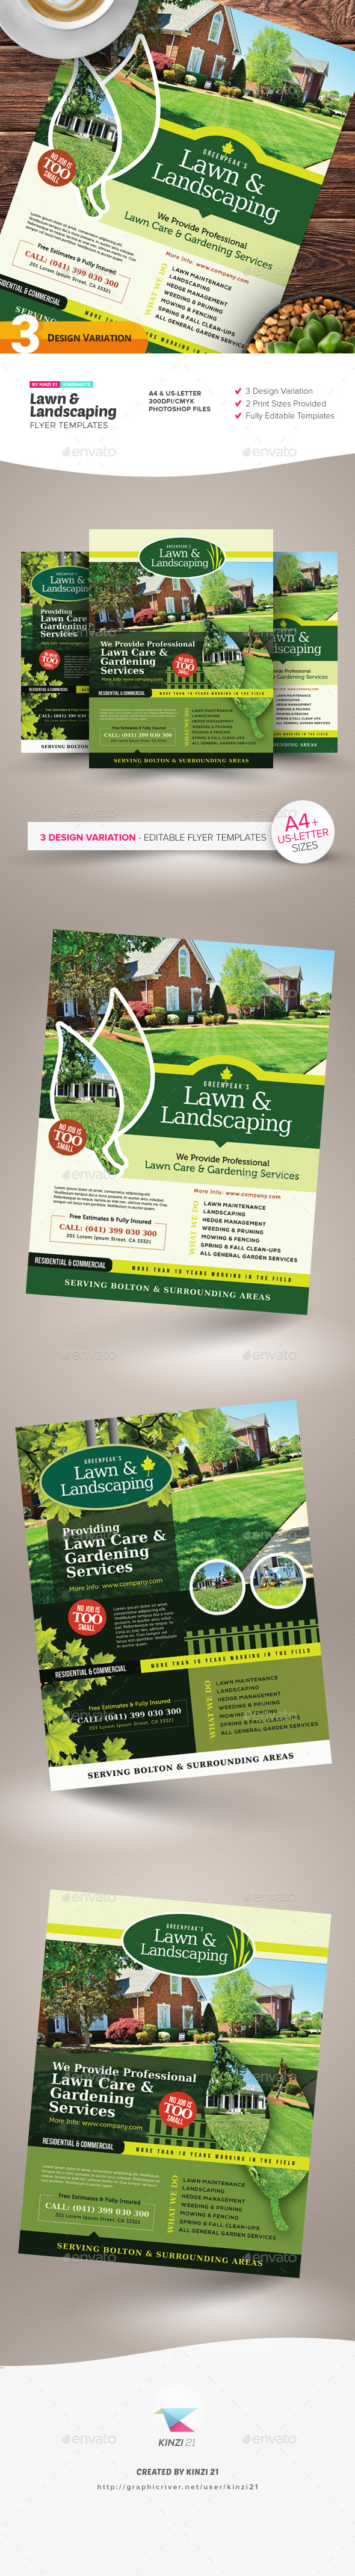 Lawn & Landscaping Flyer Templates For Lawn Care Flyers Templates Free